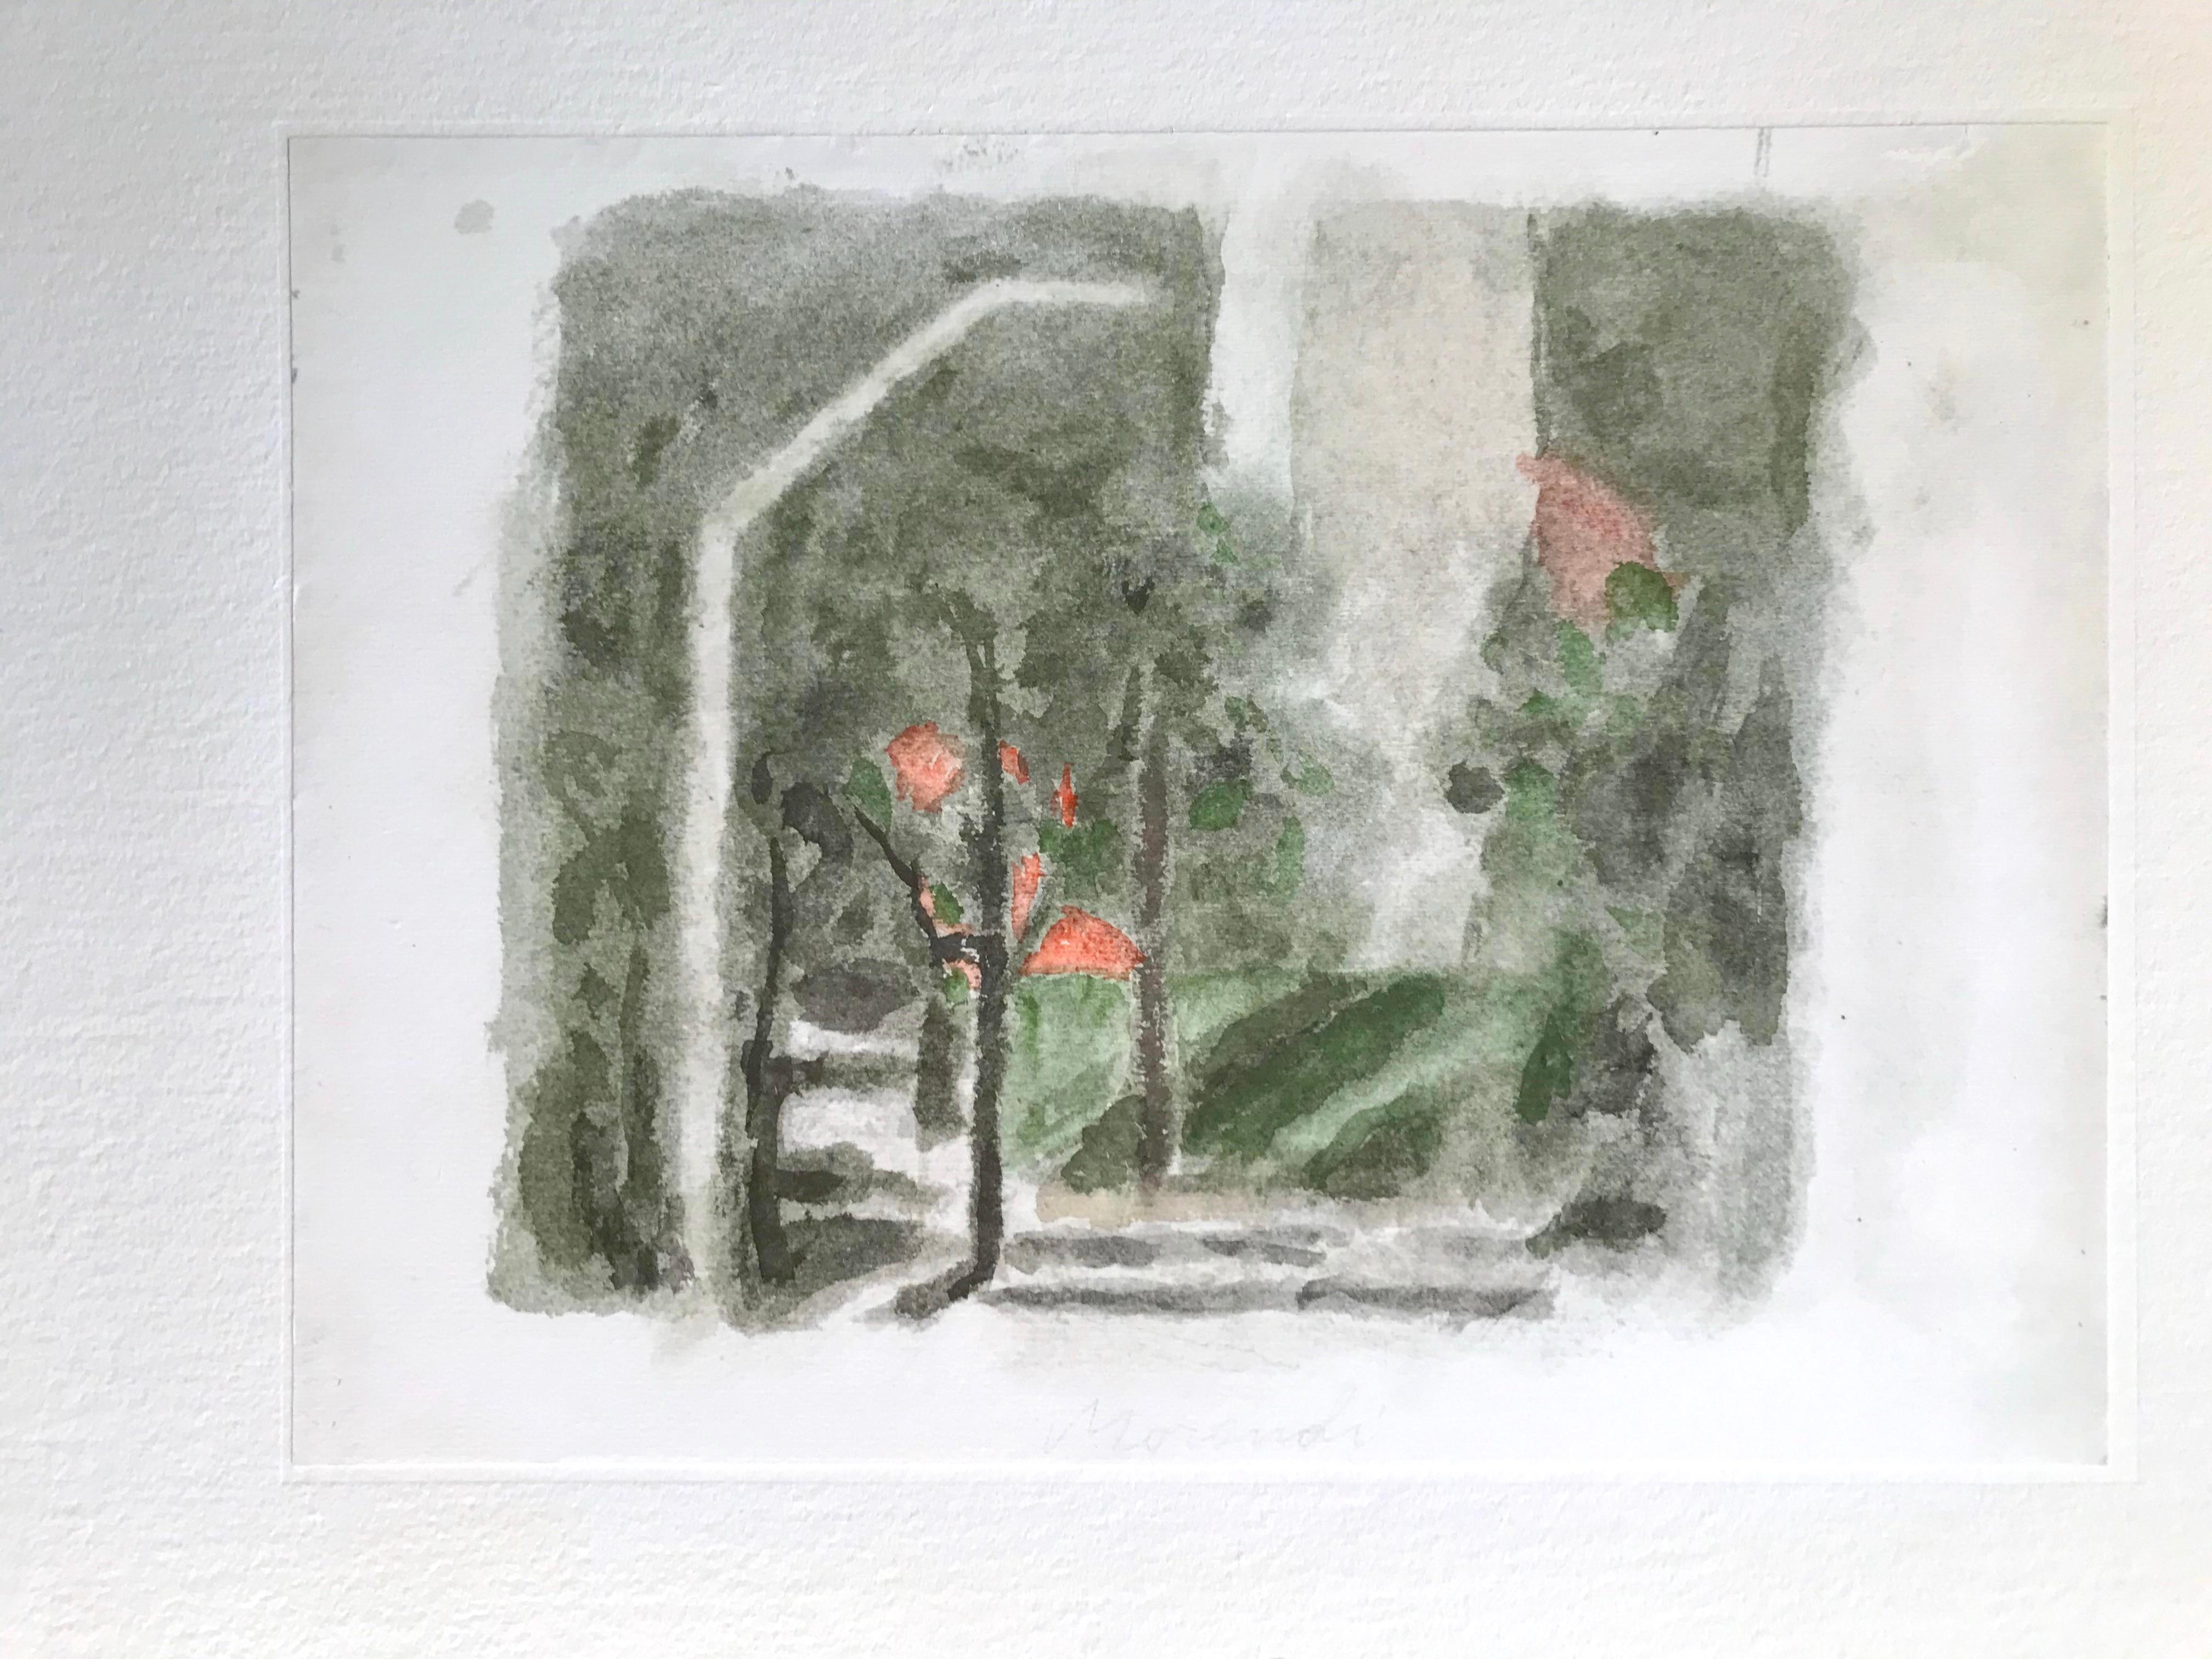 Landscape with a Red Spot - Vintage Offset Print after Giorgio Morandi - 1973